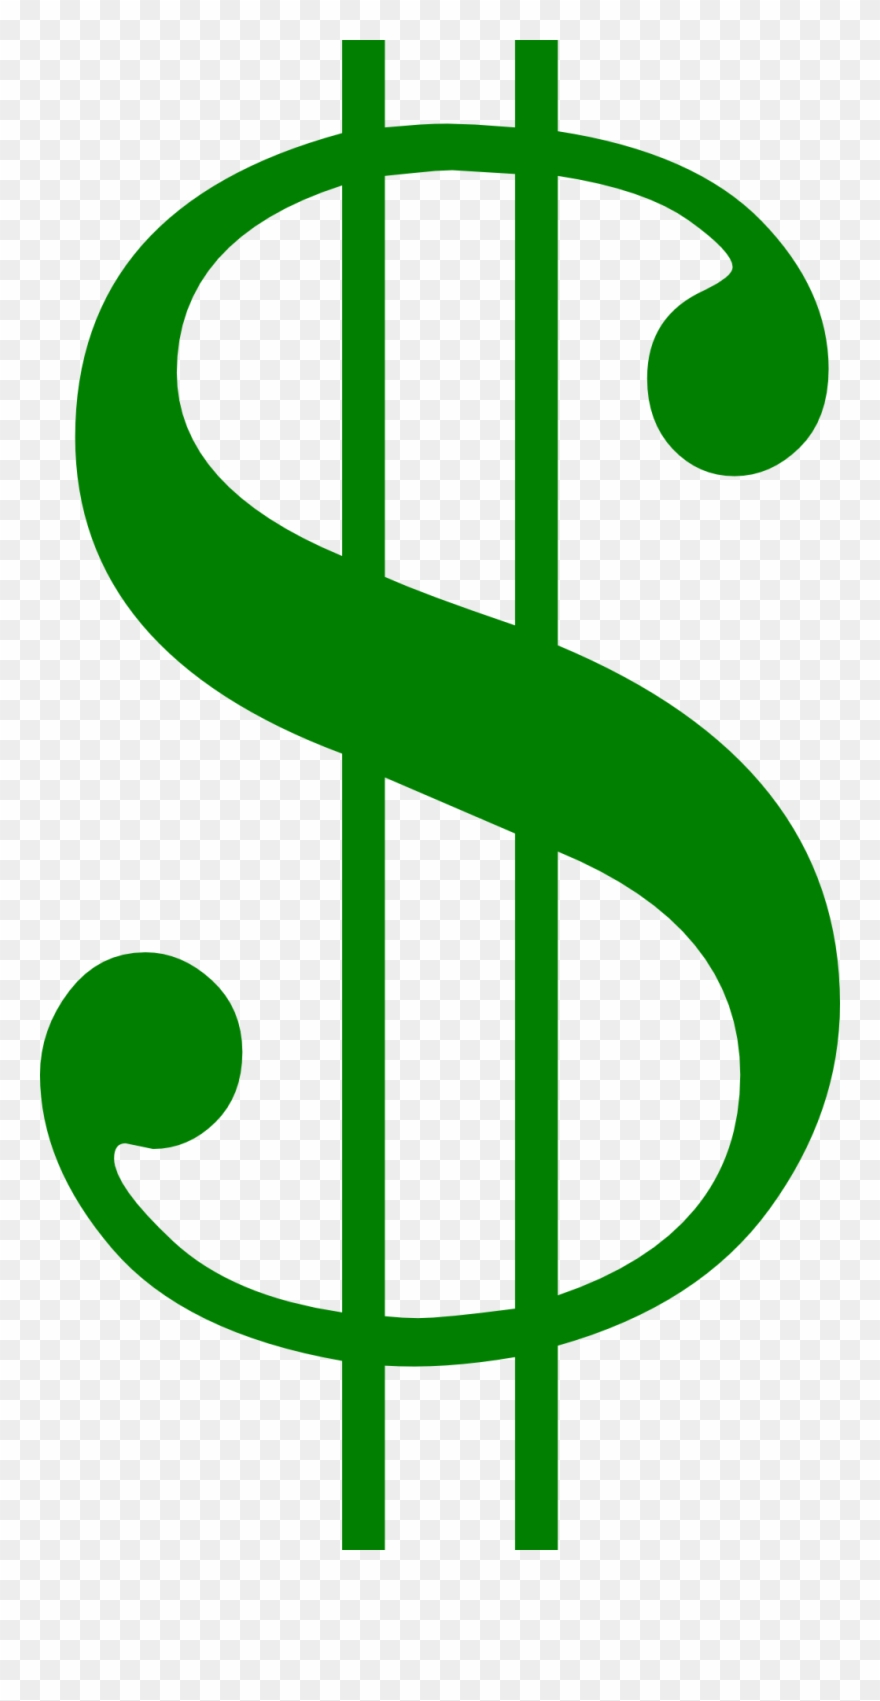 Green Dollar Sign No Image Gallery Hcpr